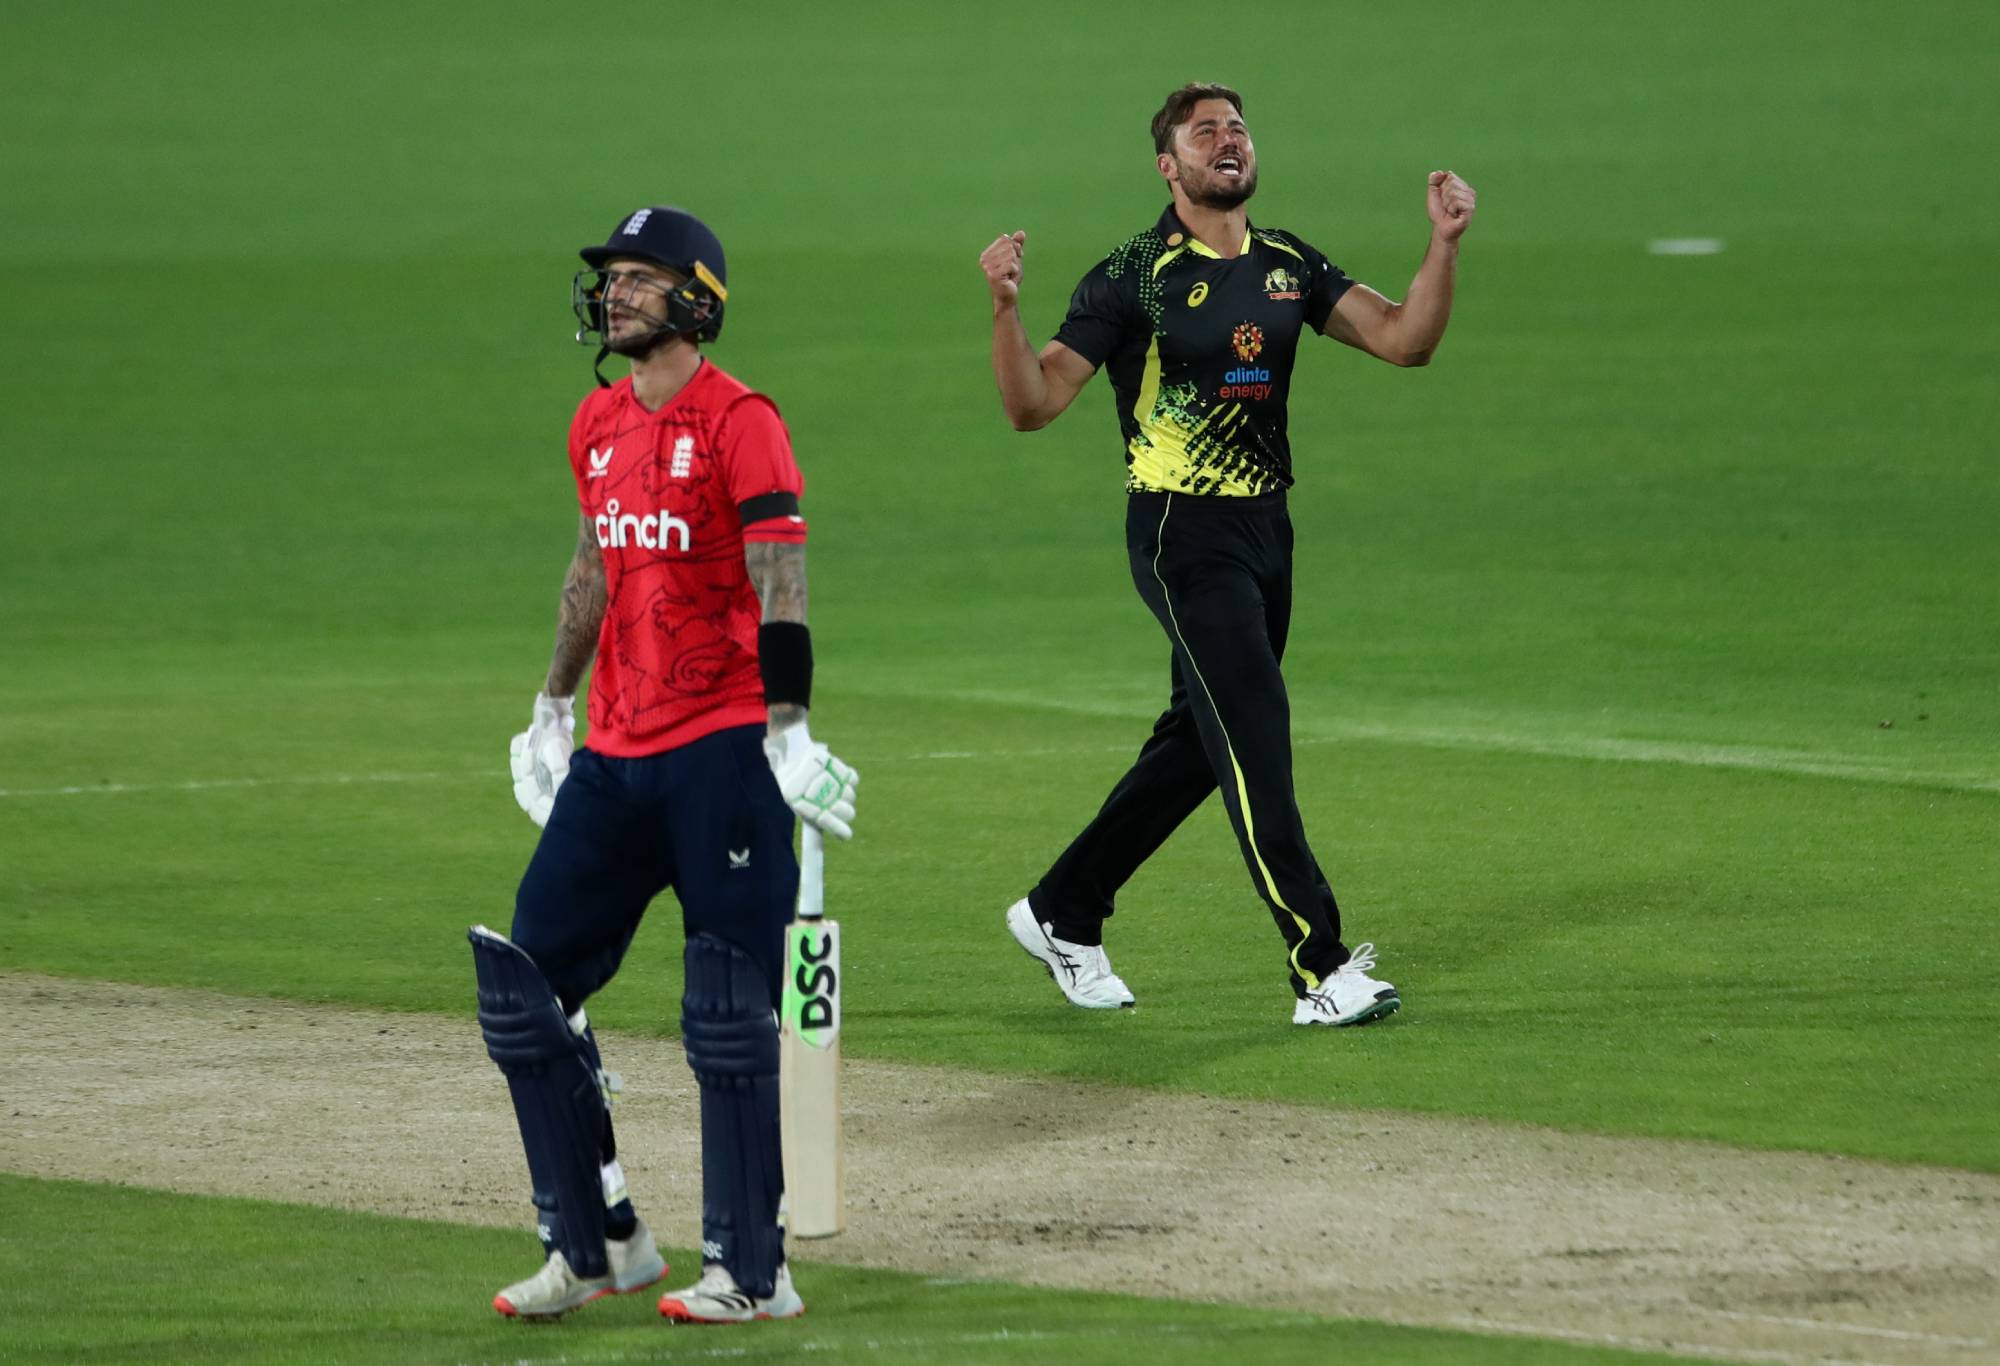 Marcus Stoinis of Australia celebrates taking the wicket of Alex Hales of England during game two of the T20 International series between Australia and England at Manuka Oval on October 12, 2022 in Canberra, Australia. (Photo by Jason McCawley - CA/Cricket Australia via Getty Images)